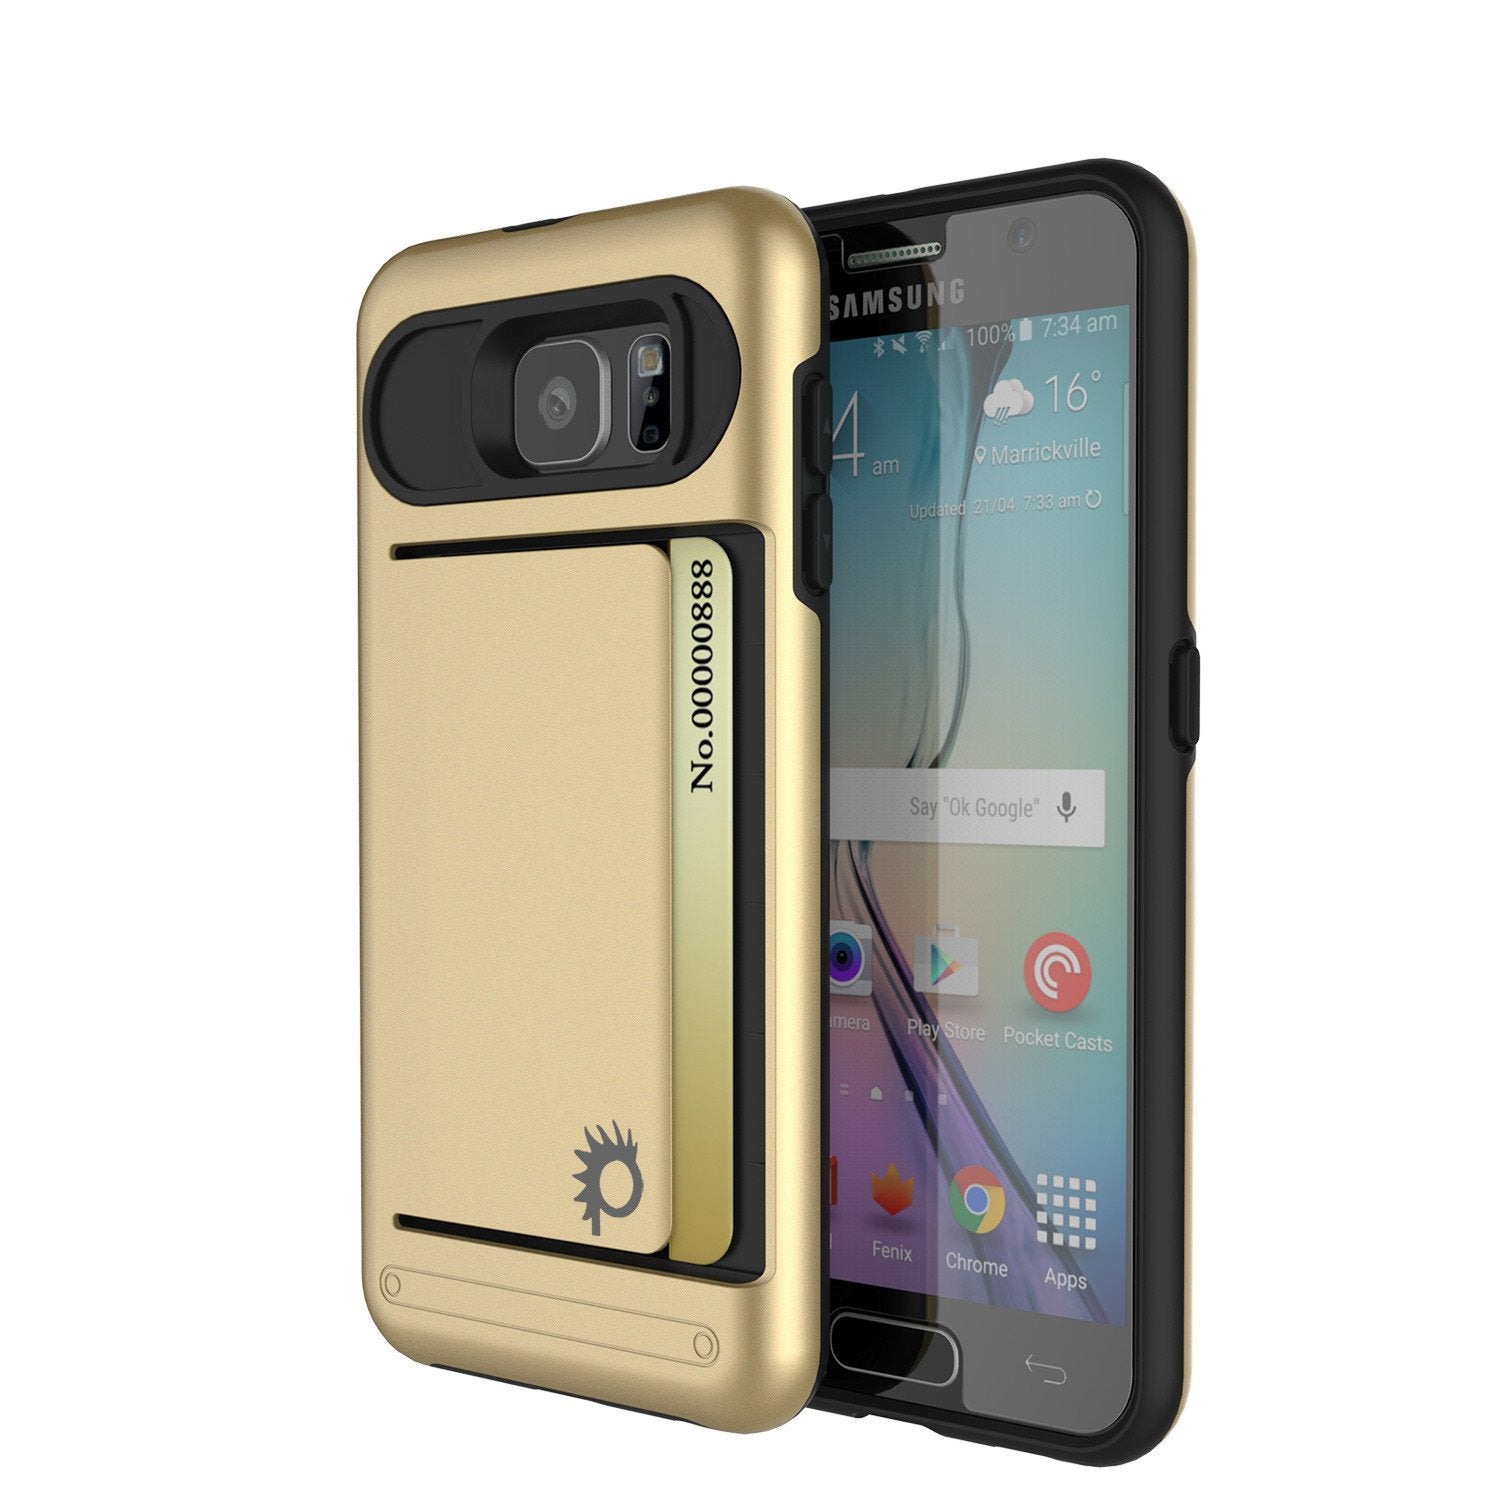 Galaxy S6 EDGE Case PunkCase CLUTCH Gold Series Slim Armor Soft Cover Case w/ Screen Protector - PunkCase NZ